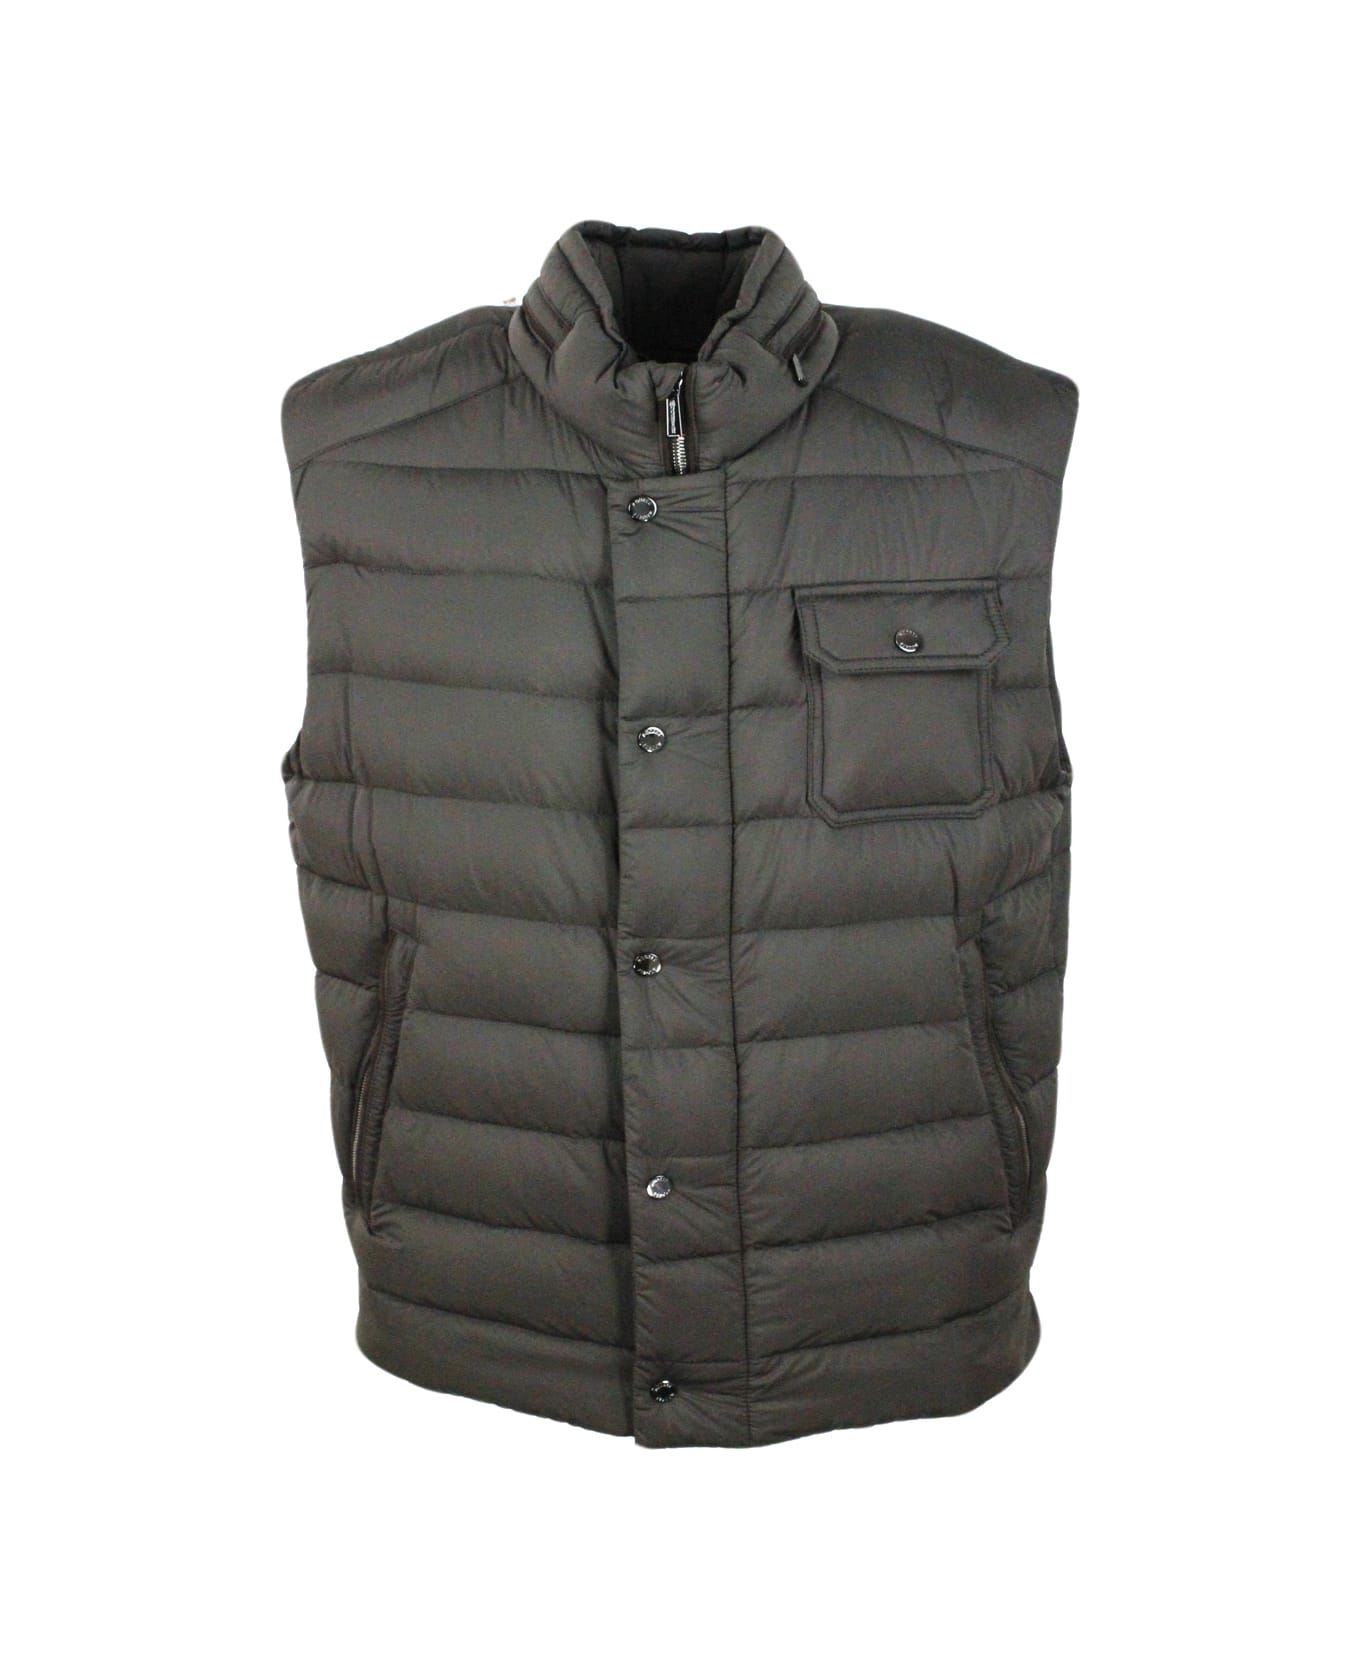 Moorer Sleeveless Vest Padded With Real Goose Down With Concealed Hood And Front Zip And Button Closure - Military